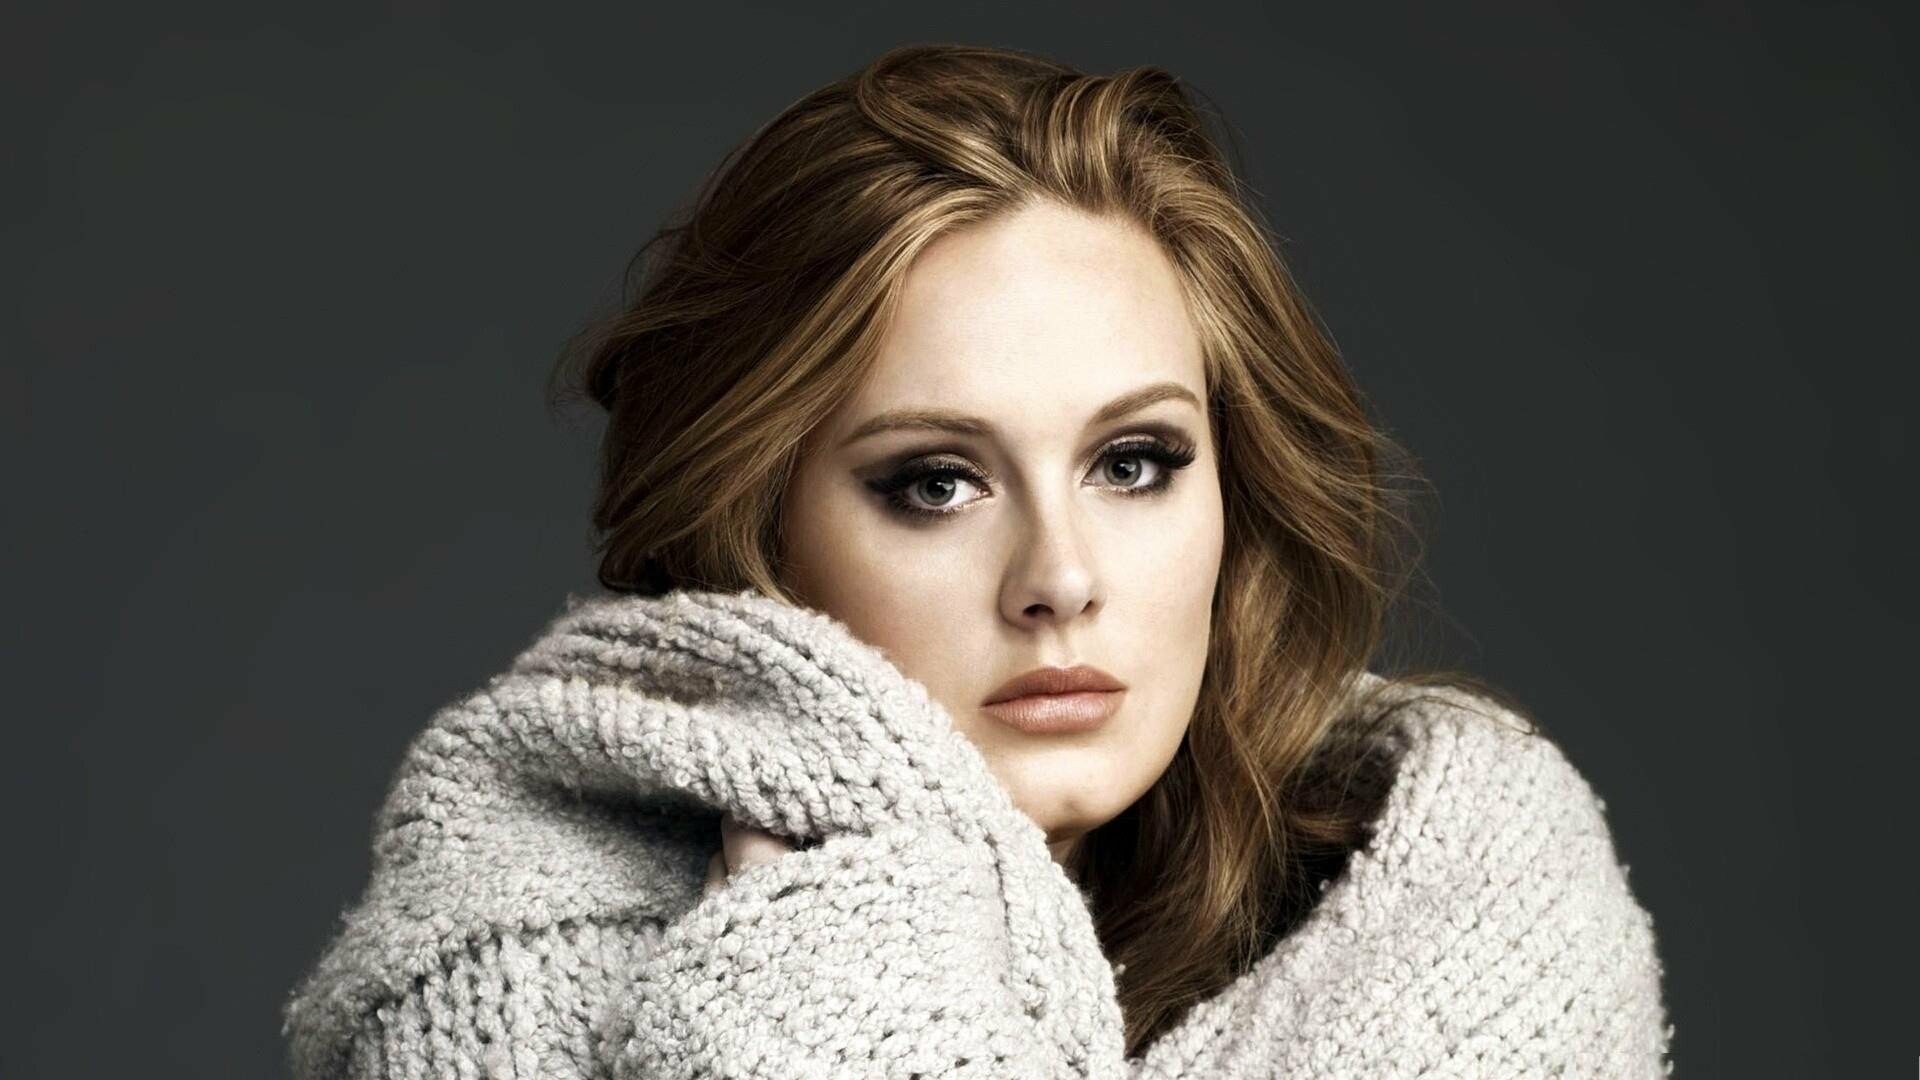 Adele: A Grammy Award-Winning English singer-songwriter from Enfield, Skyfall. 1920x1080 Full HD Background.